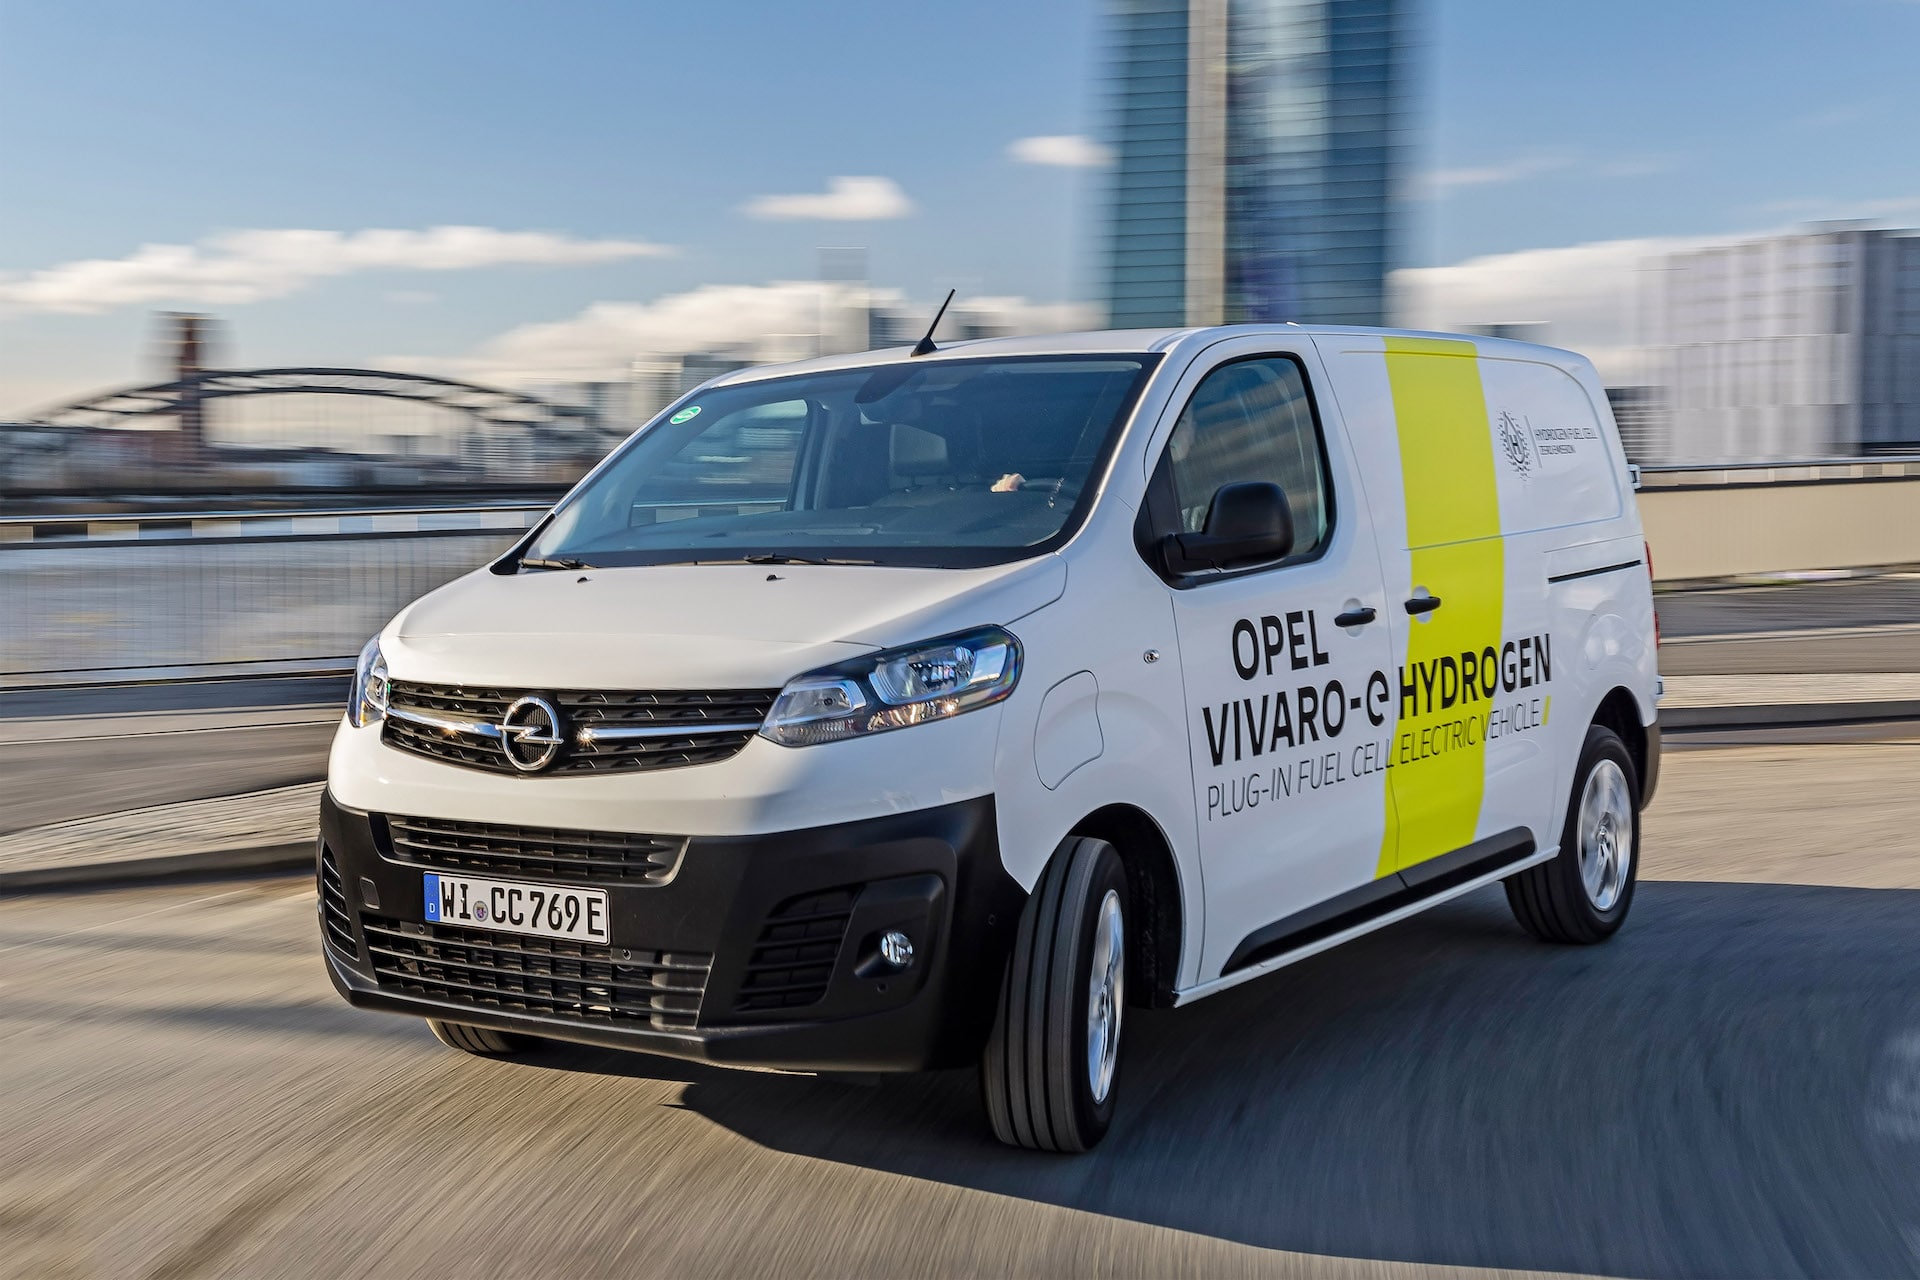 Into The Hydrogen-Based Future Now, with Opel Vivaro-e HYDROGEN